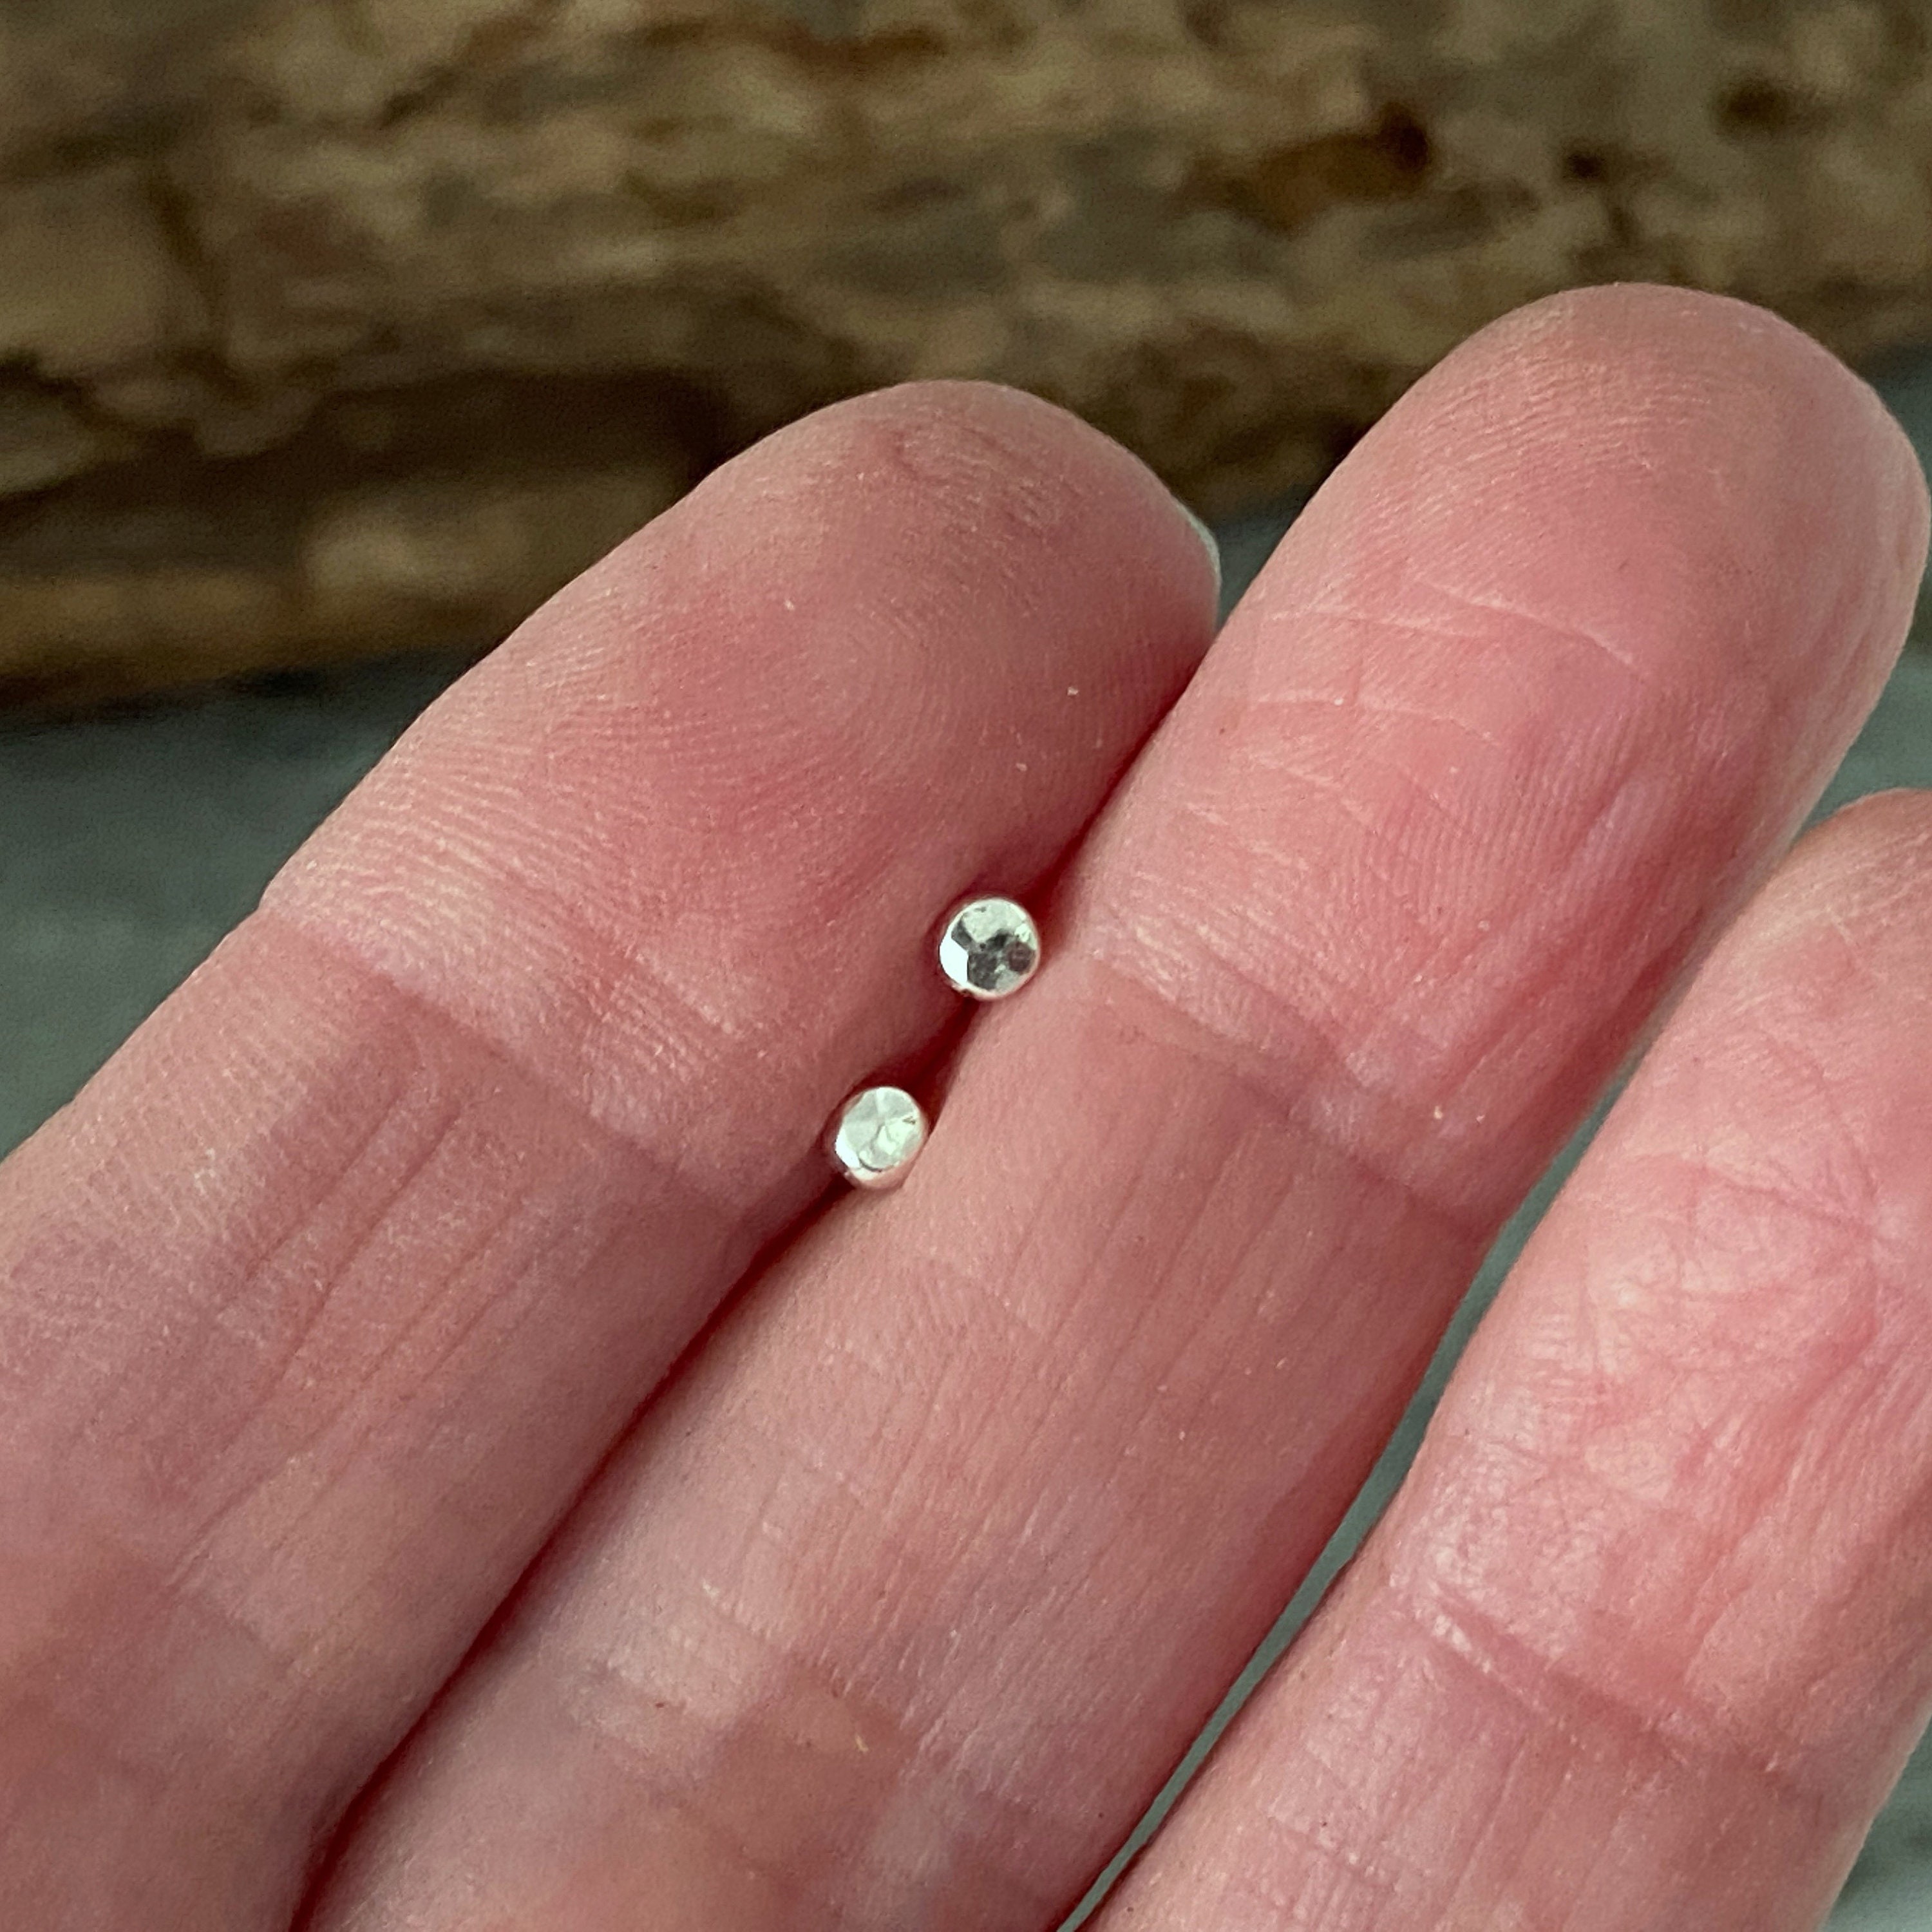 Tiny Silver Dot Studs With A Random Hammered Faceted Look, Minimalist Studs, Very Small Sterling Earrings